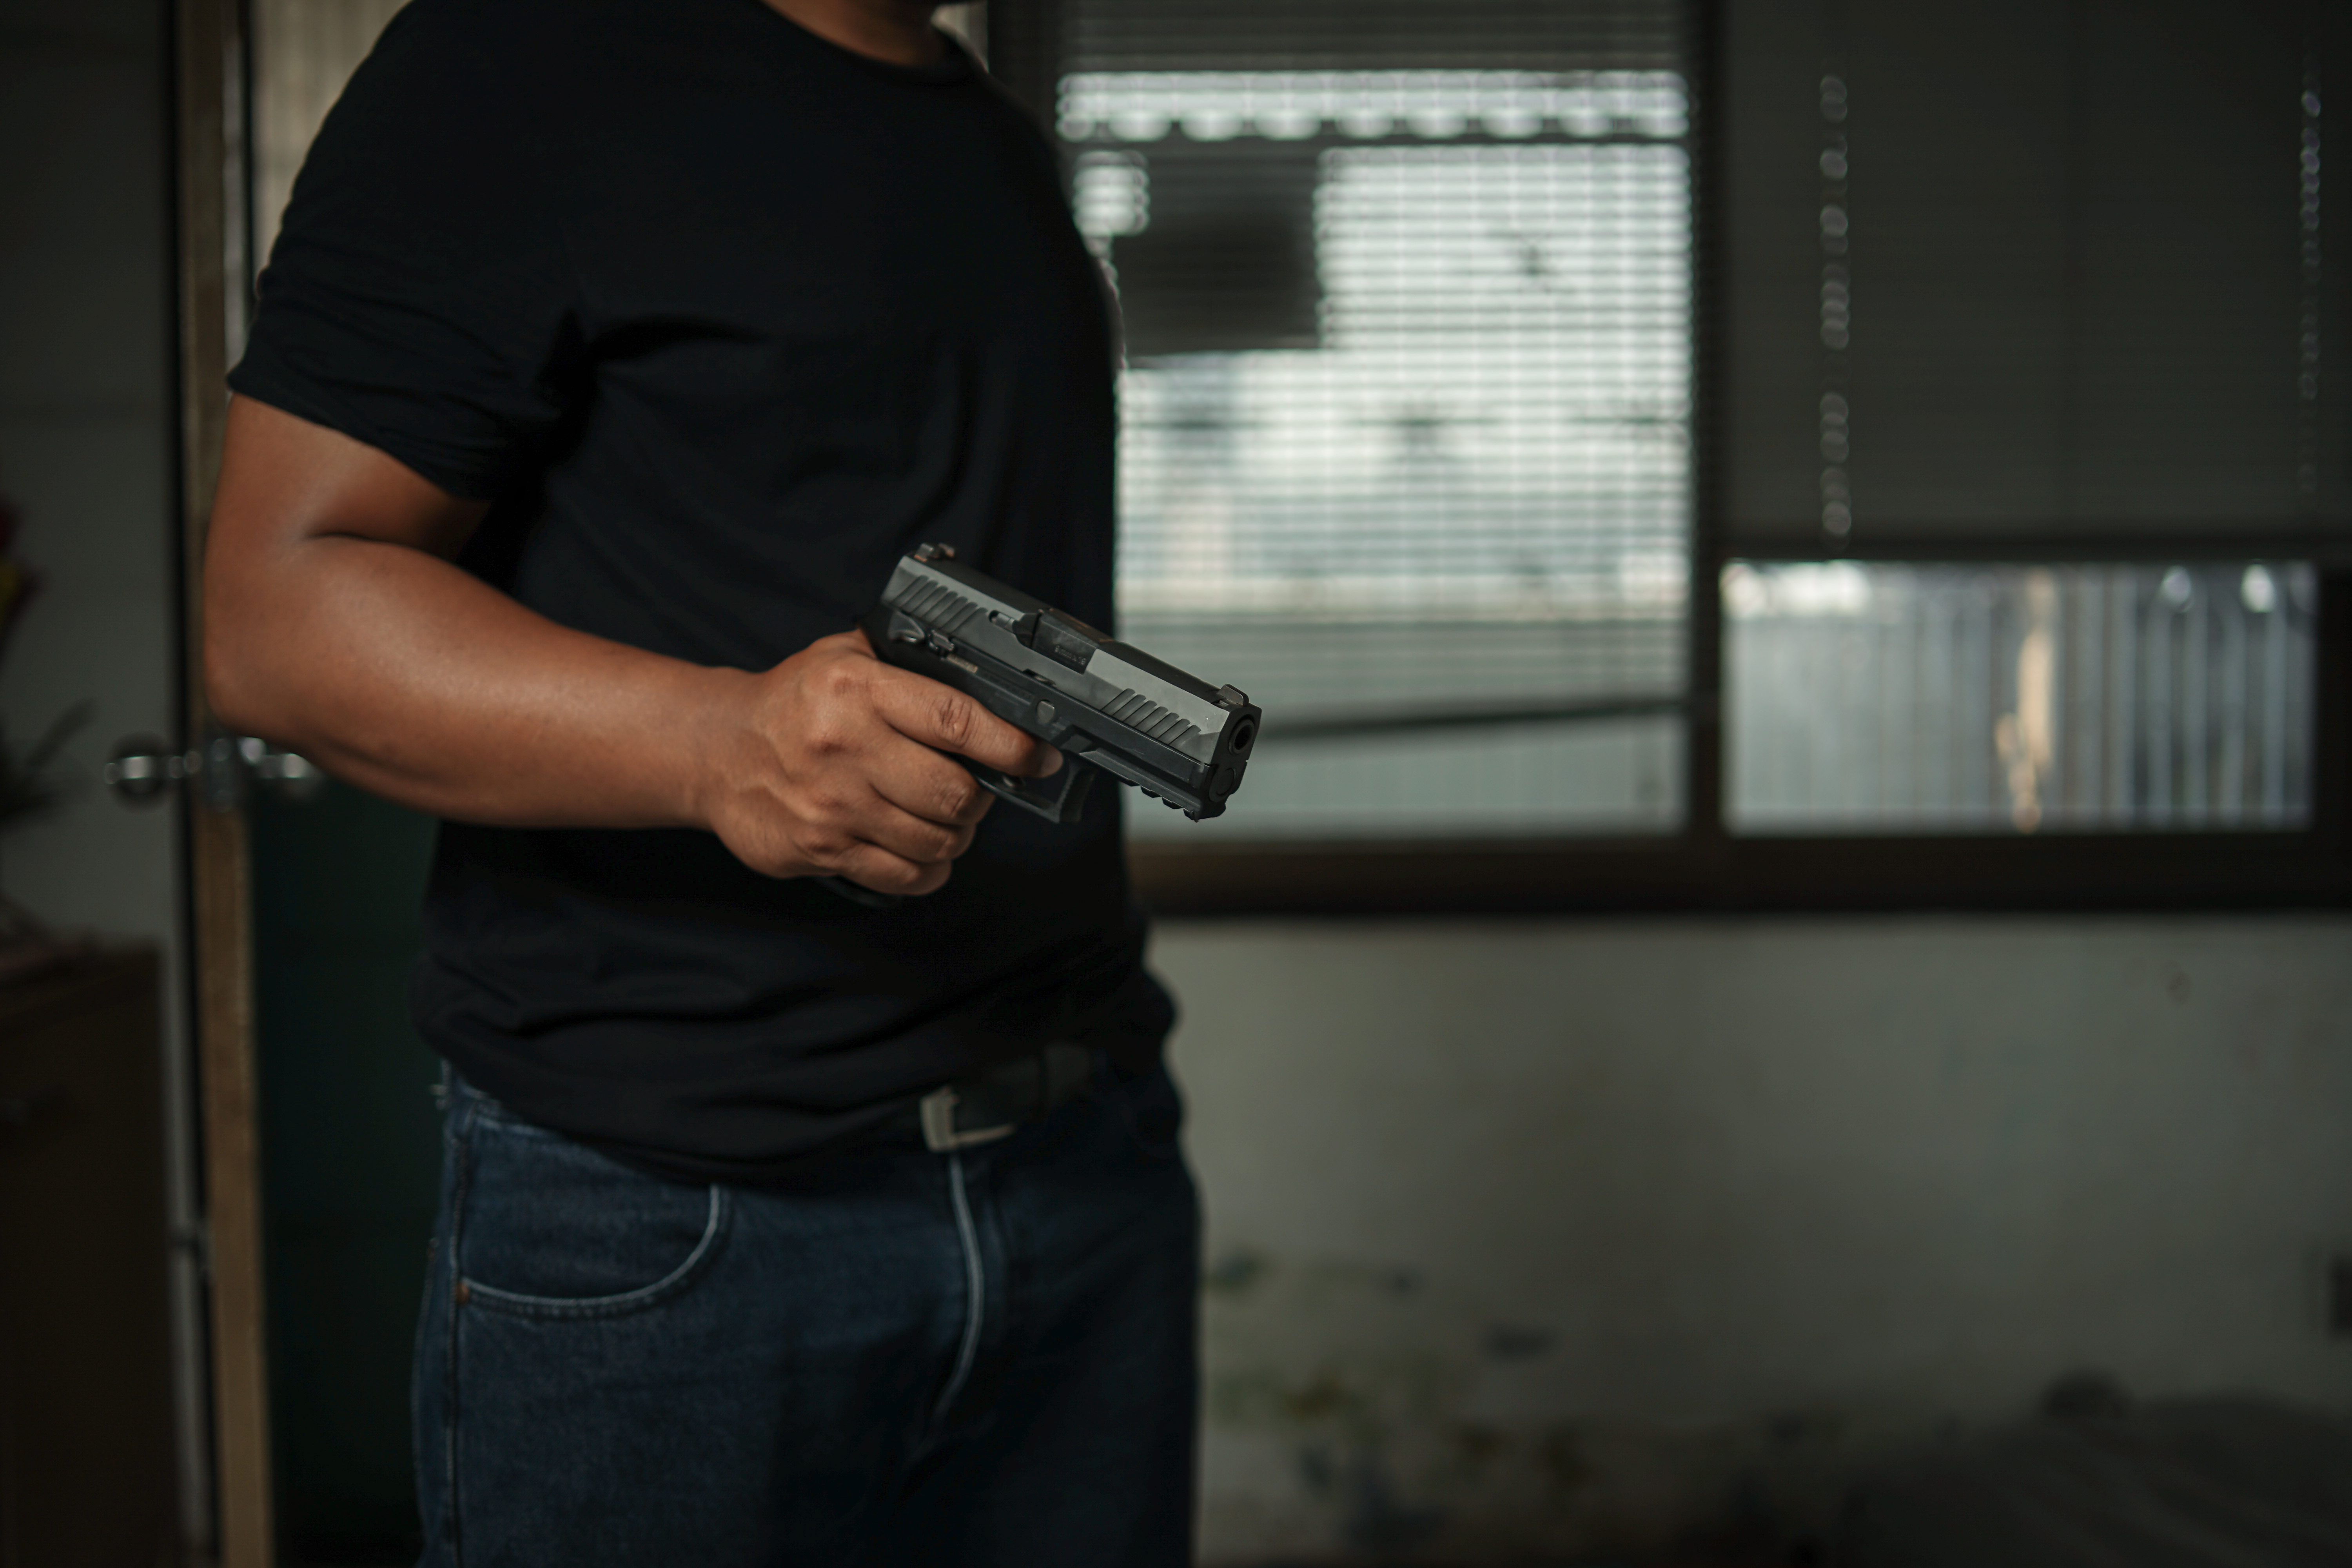 Man holding a pistol, standing in a room in black, pointing and aiming a gun at a target | Source: Shutterstock.com